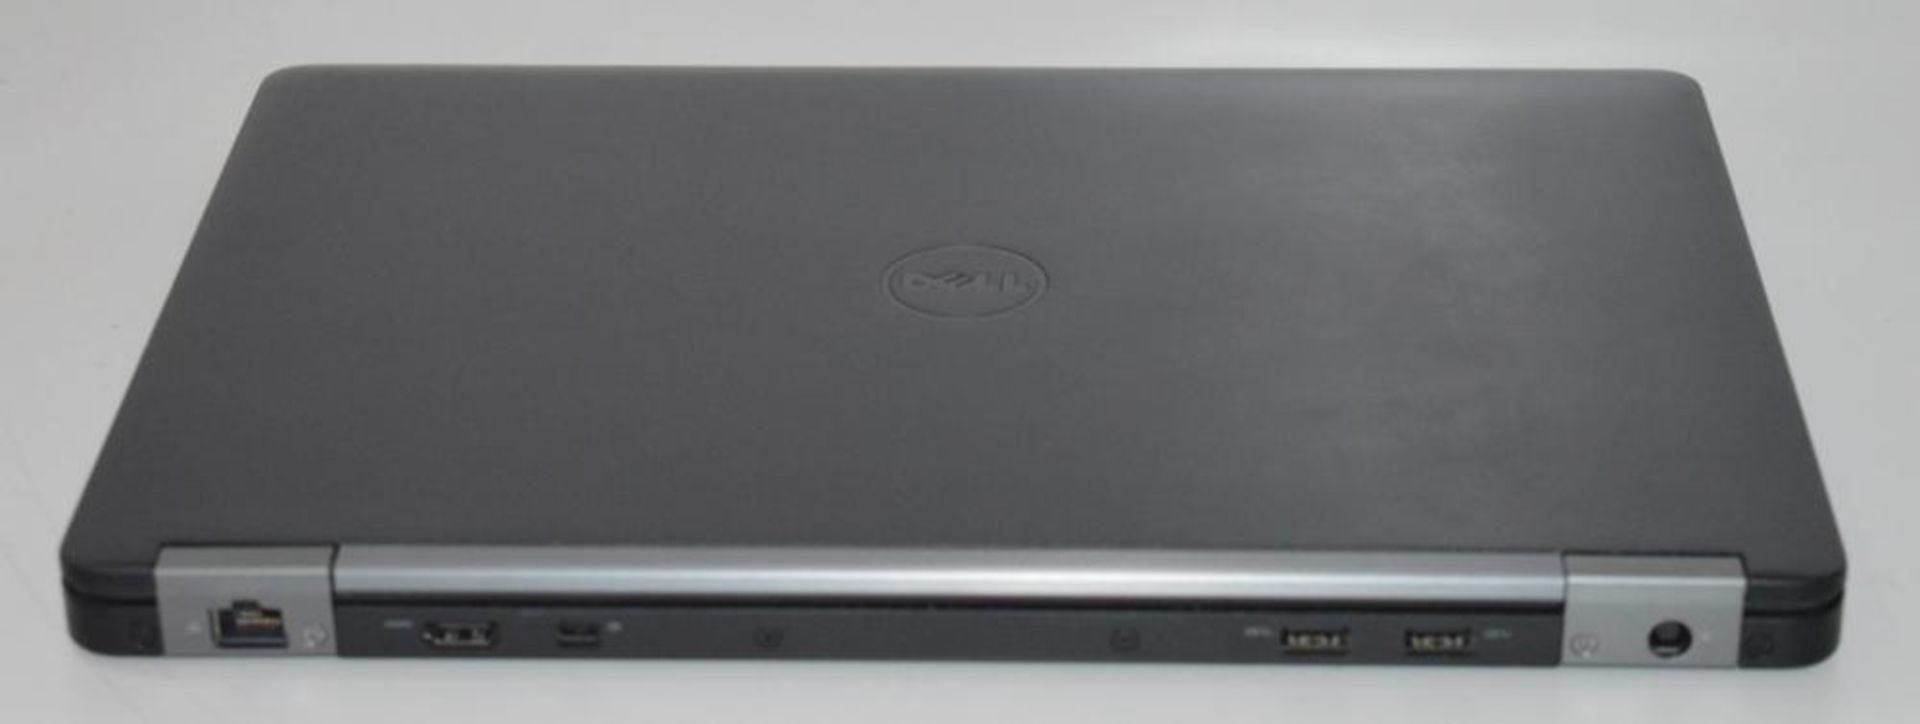 1 x Dell Latitude E7470 Laptop Computer - 14 Inch FHD Screen - Features Include a 6th Gen Core i7- - Image 3 of 10